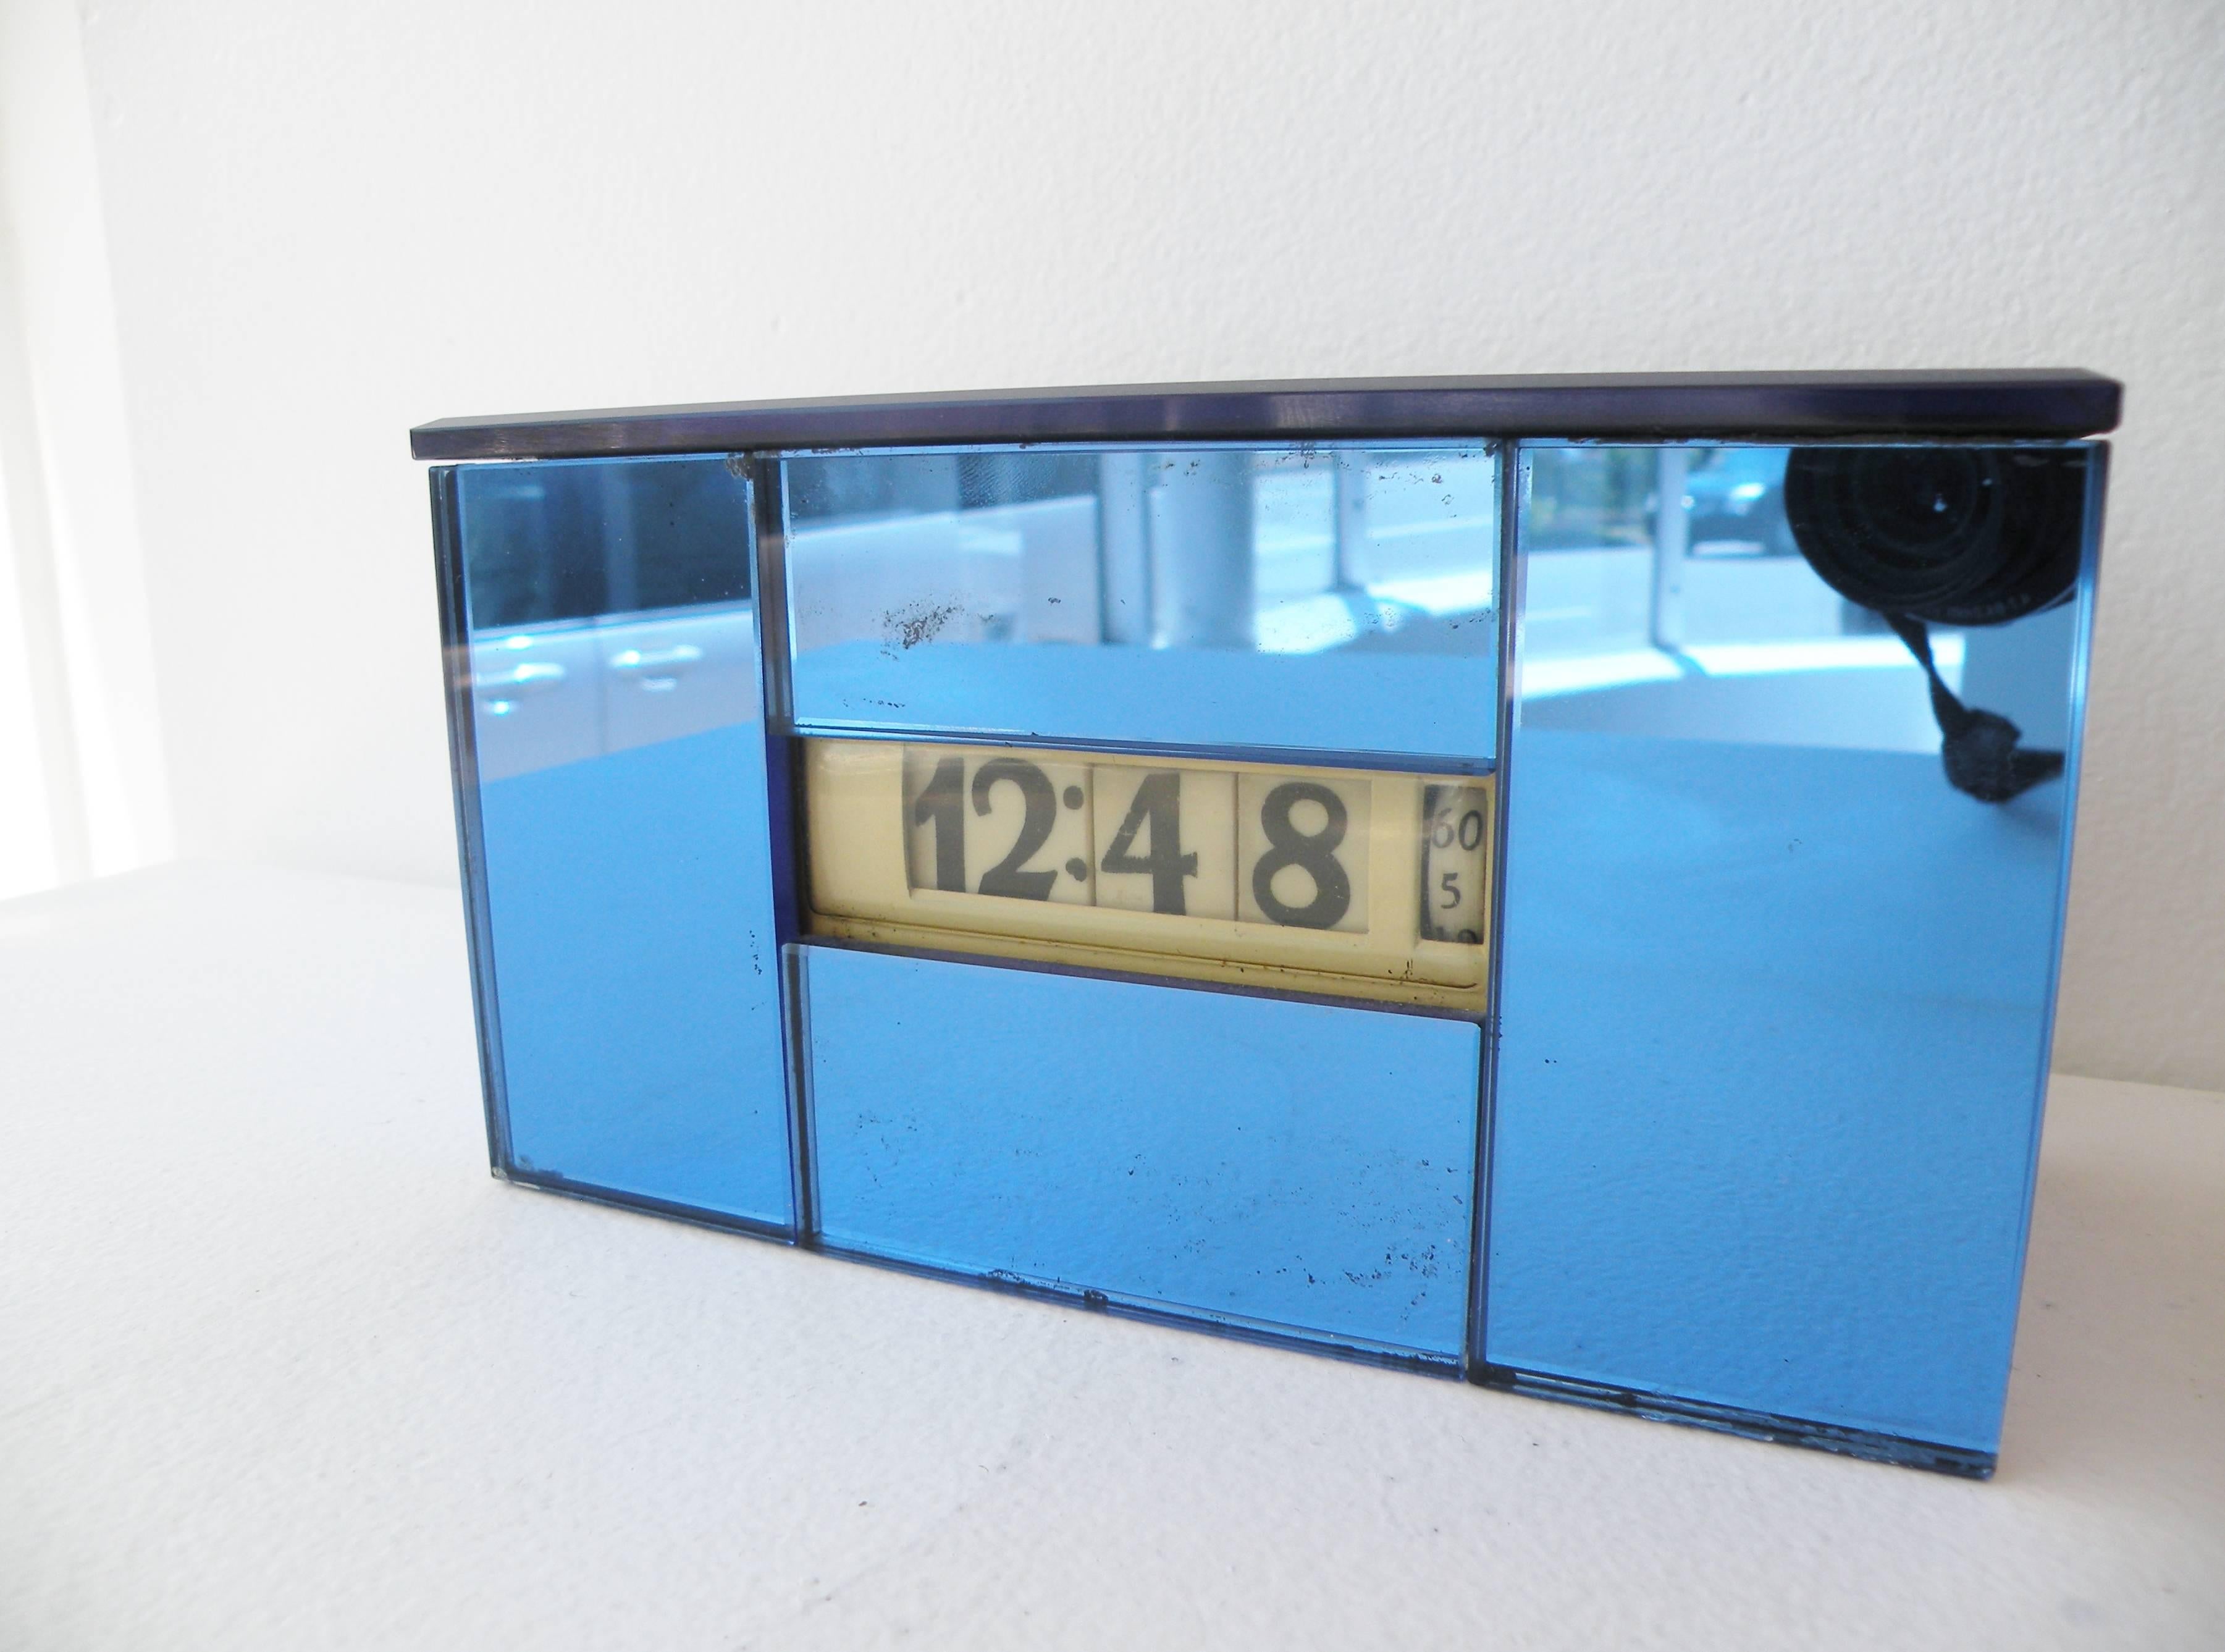 Art Deco 1930s era Lawson Time Inc., Los Angeles, California cyclometer digital table clock model 99 with the scarce blue mirror glass case and chrome plate backplate. Streamline modern lines are often a misattributed design of KEM Weber, current